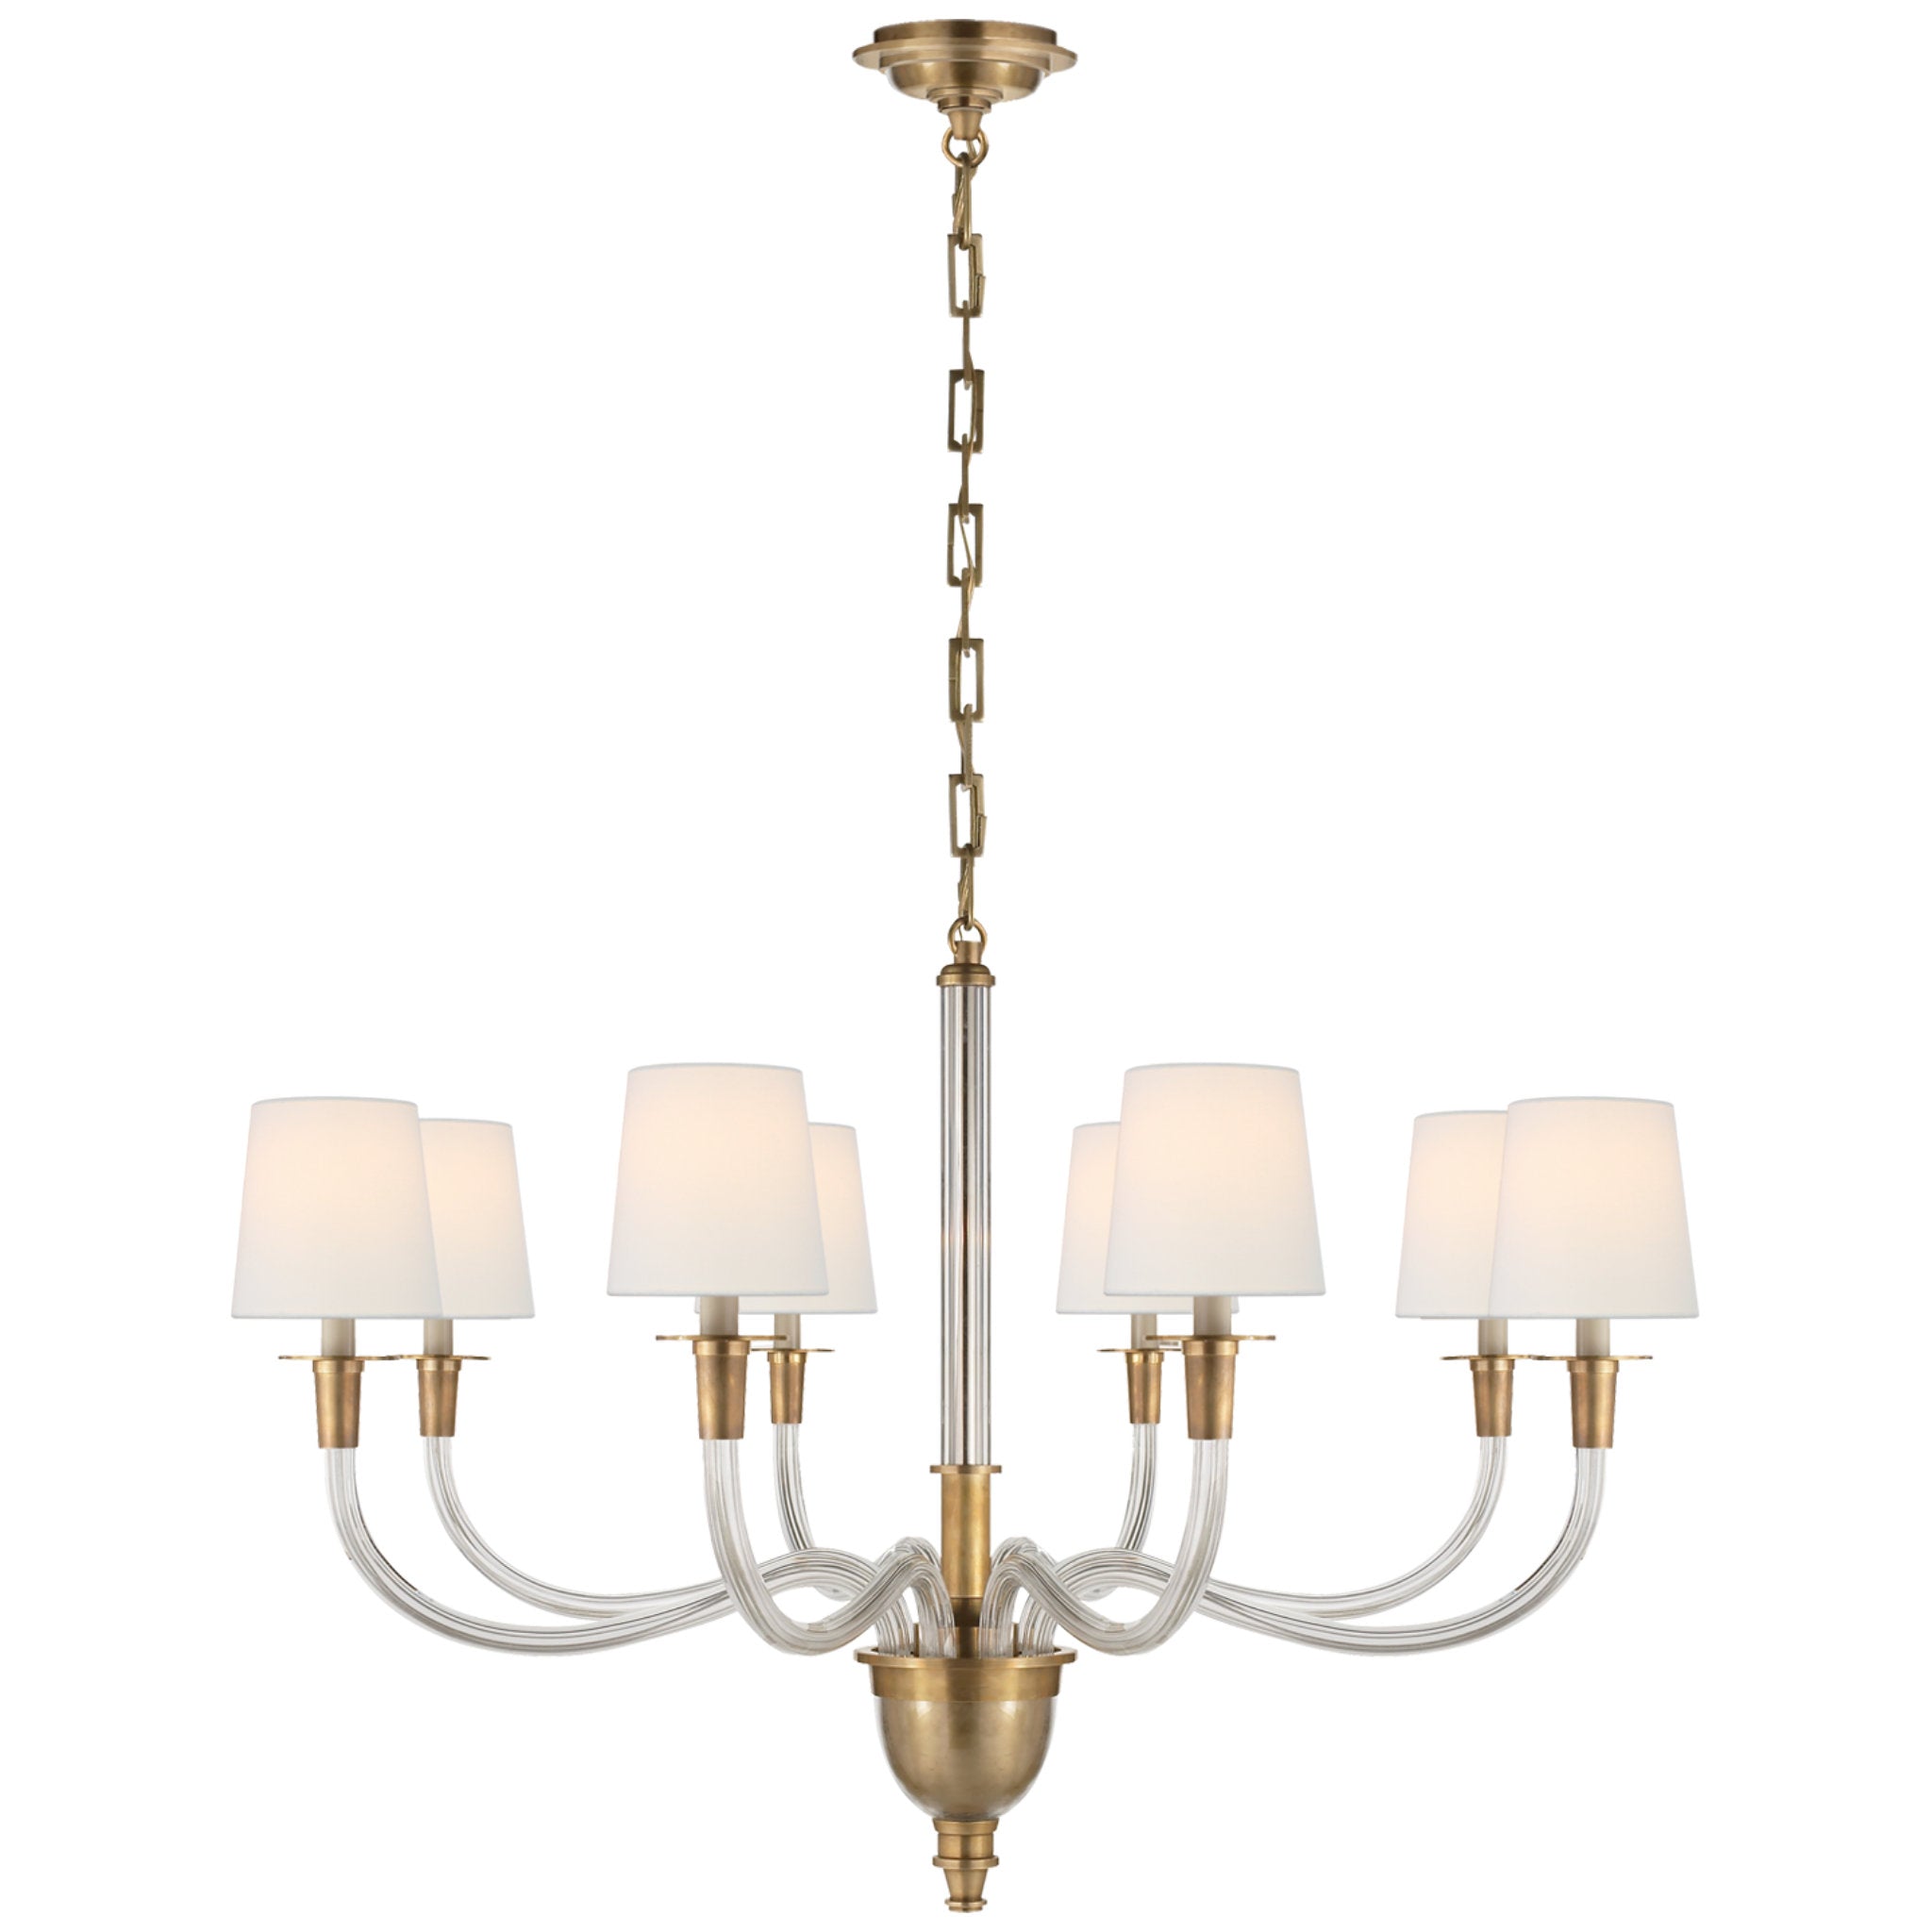 Thomas O'Brien Vivian Large One-Tier Chandelier in Hand-Rubbed Antique Brass with Linen Shades